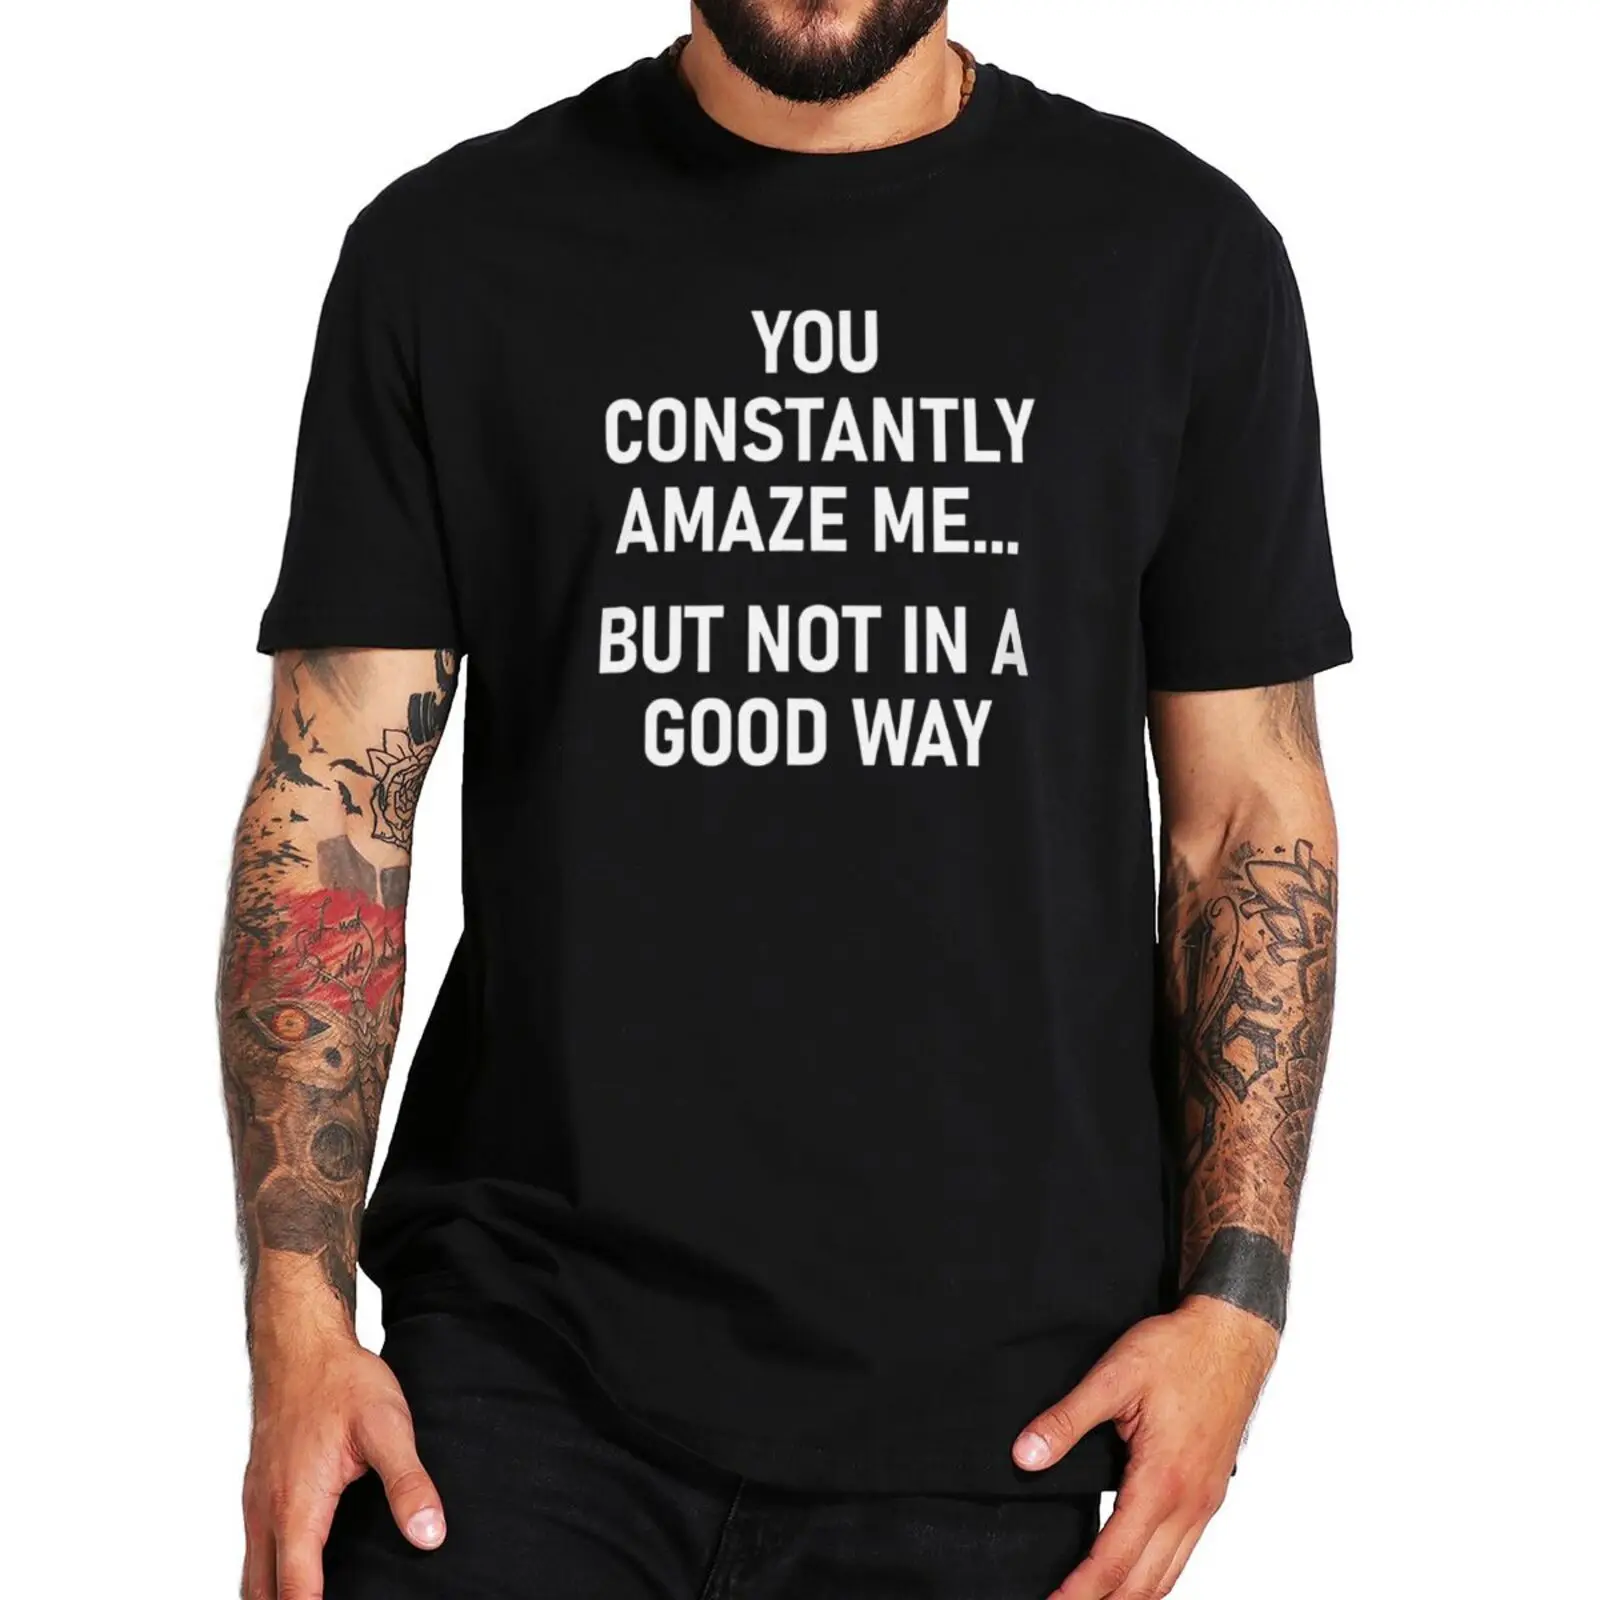 

You Constantly Amaze Me T Shirt Funny Sarcastic Saying Humor Jokes Men Clothing Novelty Casual 100% Cotton Soft Top EU Size